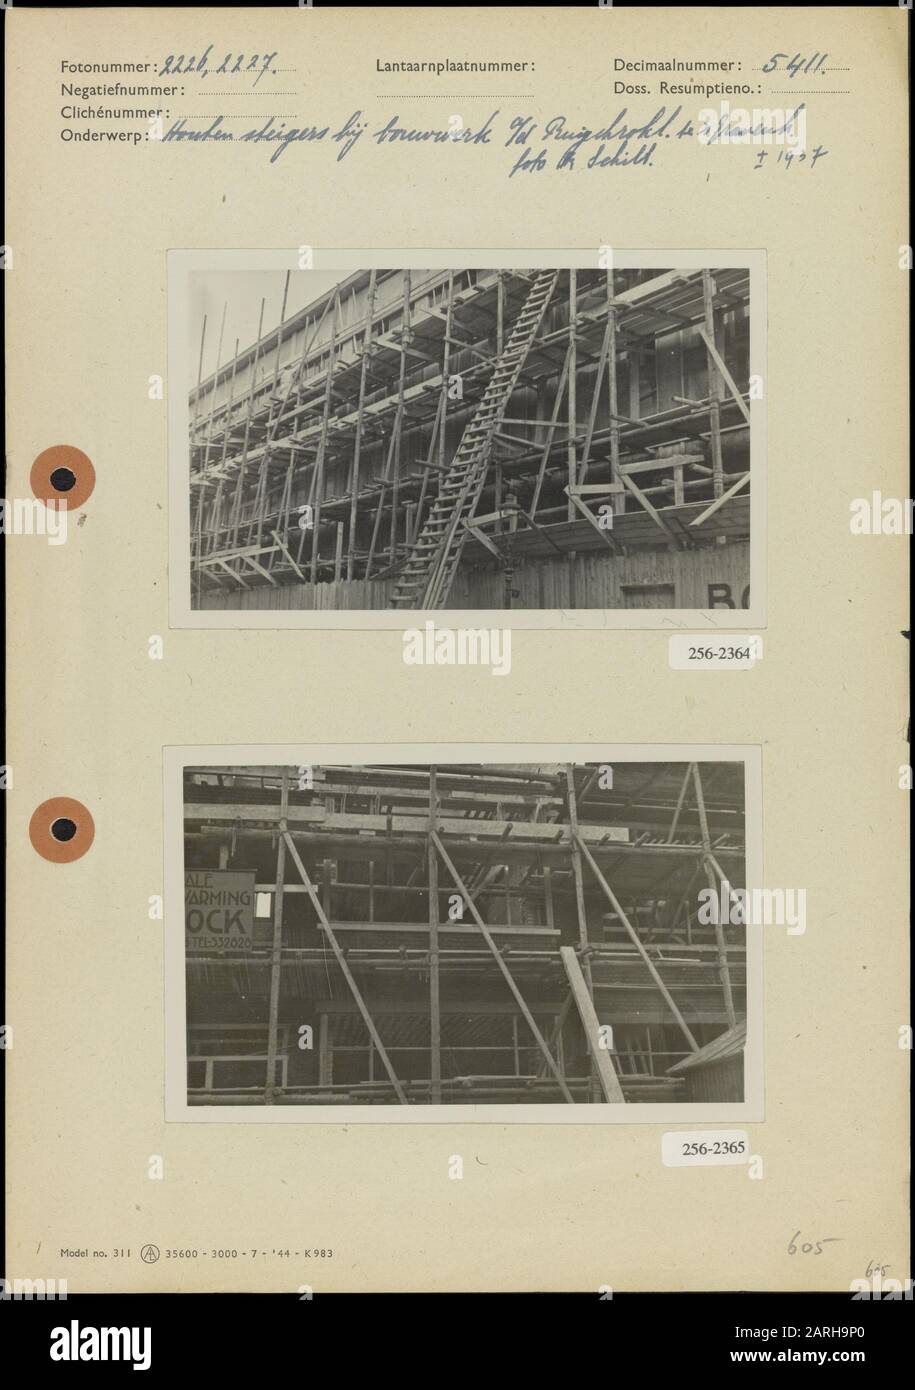 Woningbouw Ruychrocklaan in The Hague  Photo 1: Wooden scaffolding near a building on the Ruychrocklaan in 's- Gravenhage (8,5x13,5 cm;  Schilt) Photo 2: Wooden scaffolding near a building on the Ruychrocklaan in The Hague (8,5x13,5 cm;  Schilt) Date: 1937 Location: The Hague, Zuid-Holland Keywords: construction activities, scaffolding, housing Stock Photo